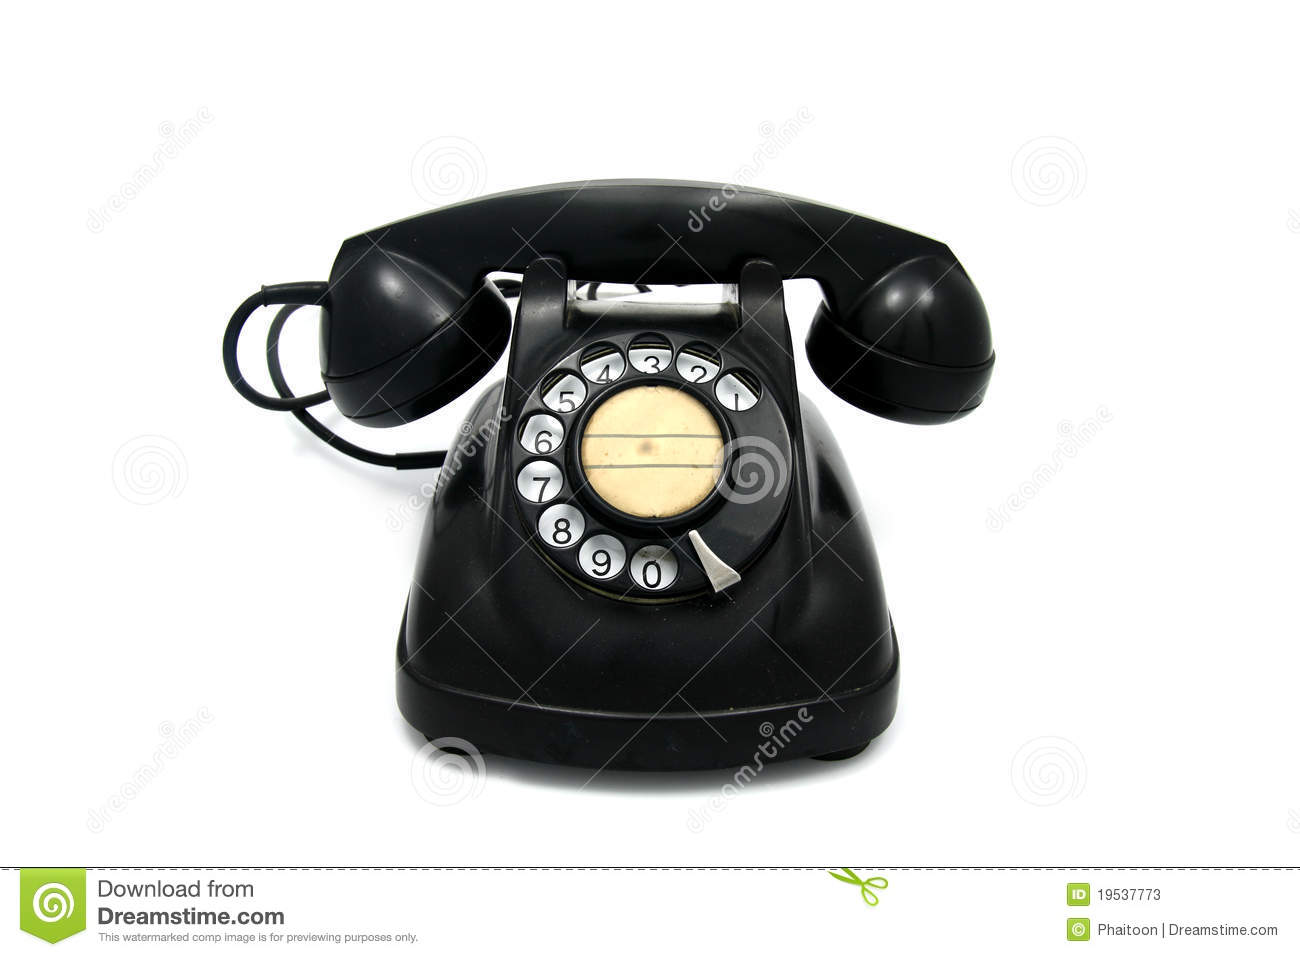 Old Telephone With Rotary Dial Stock Photos   Image  19537773